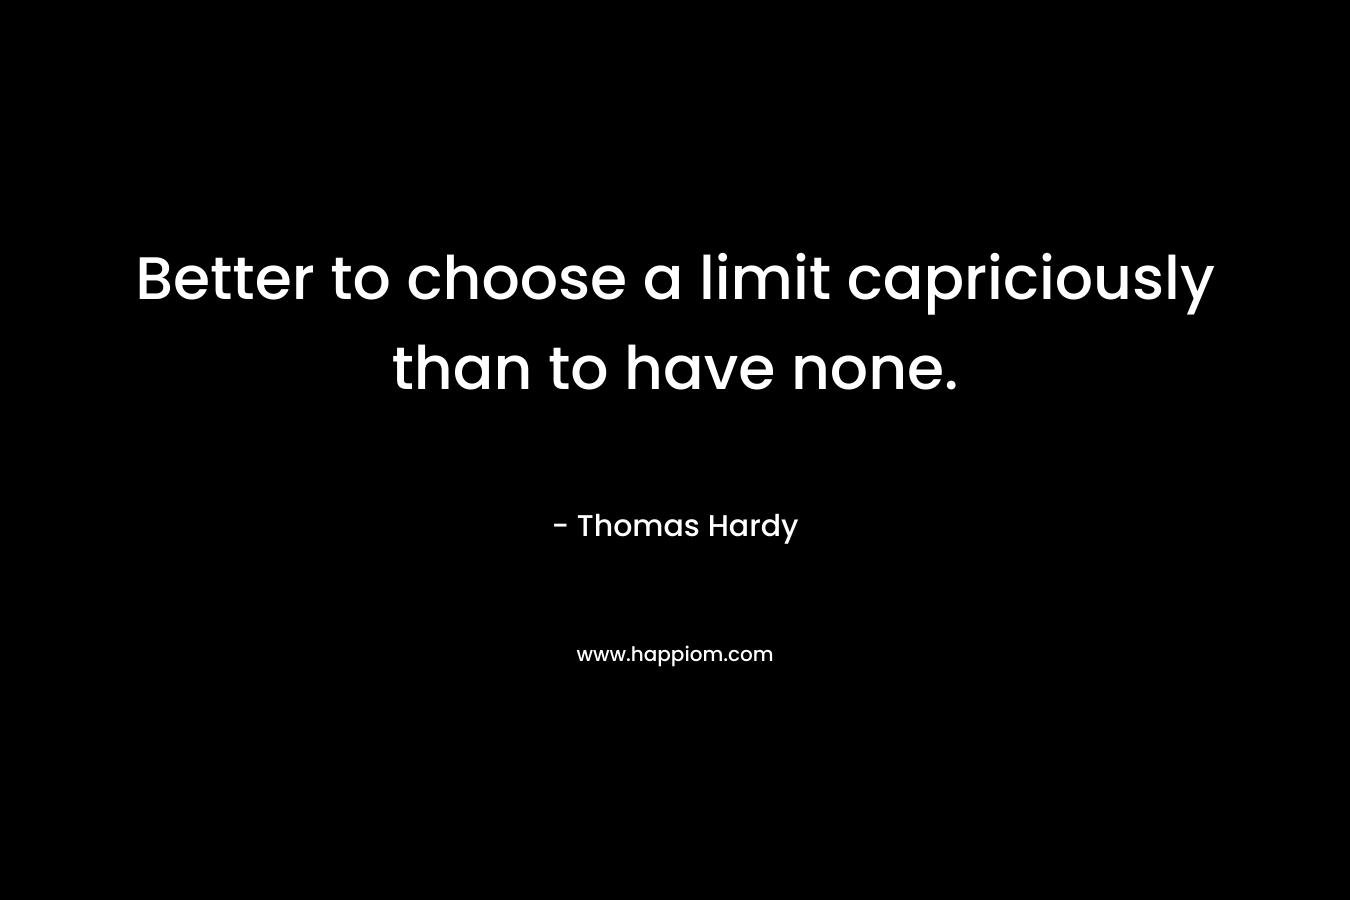 Better to choose a limit capriciously than to have none.